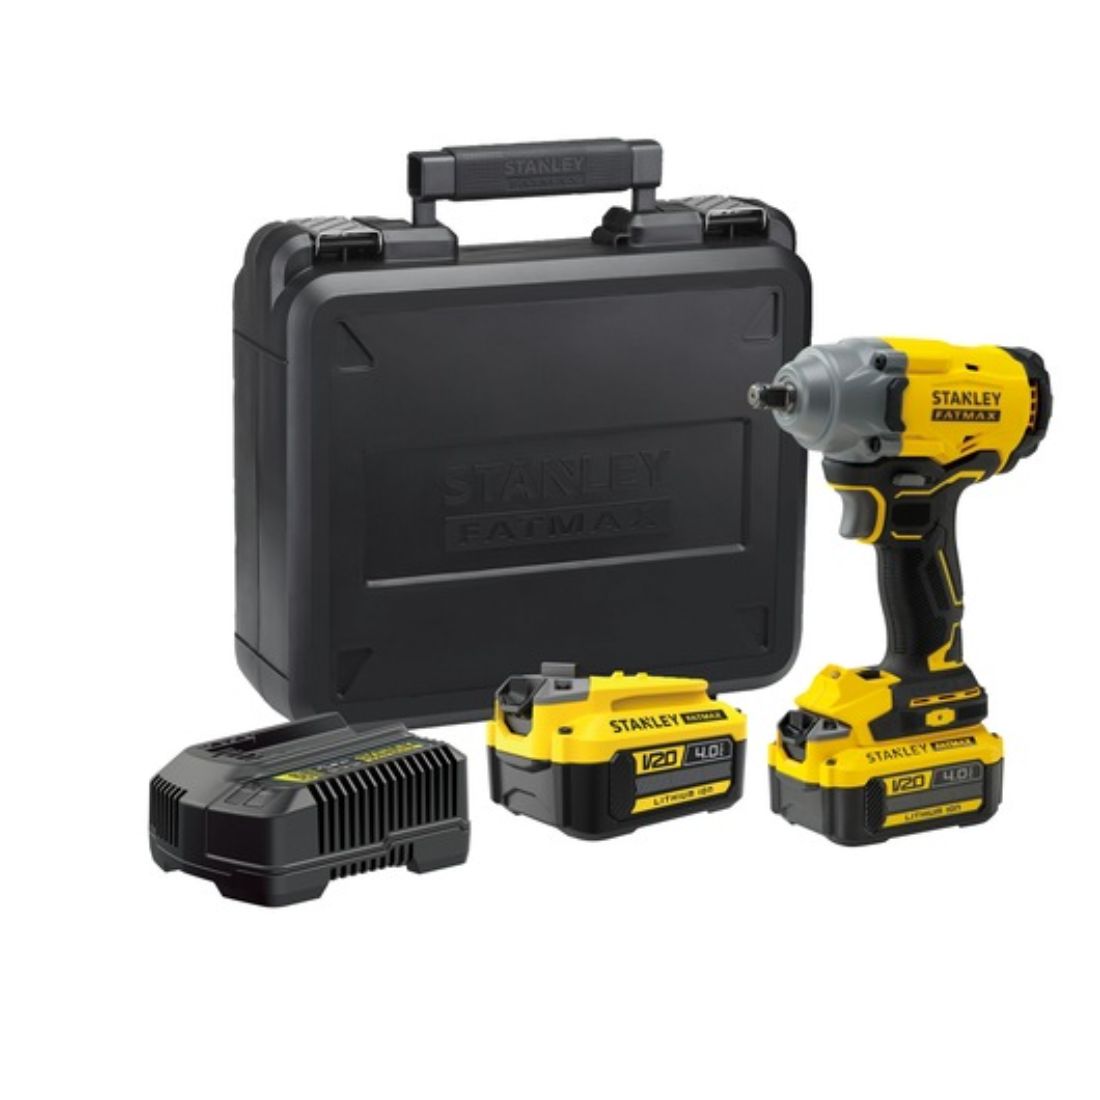 STANLEY Fatmax SBW920M2K-B1 20V 4.0Ah 1/2" Cordless Brushless Impact Wrench With 2x4.0Ah Li-ion Batteries & 1pc Charger